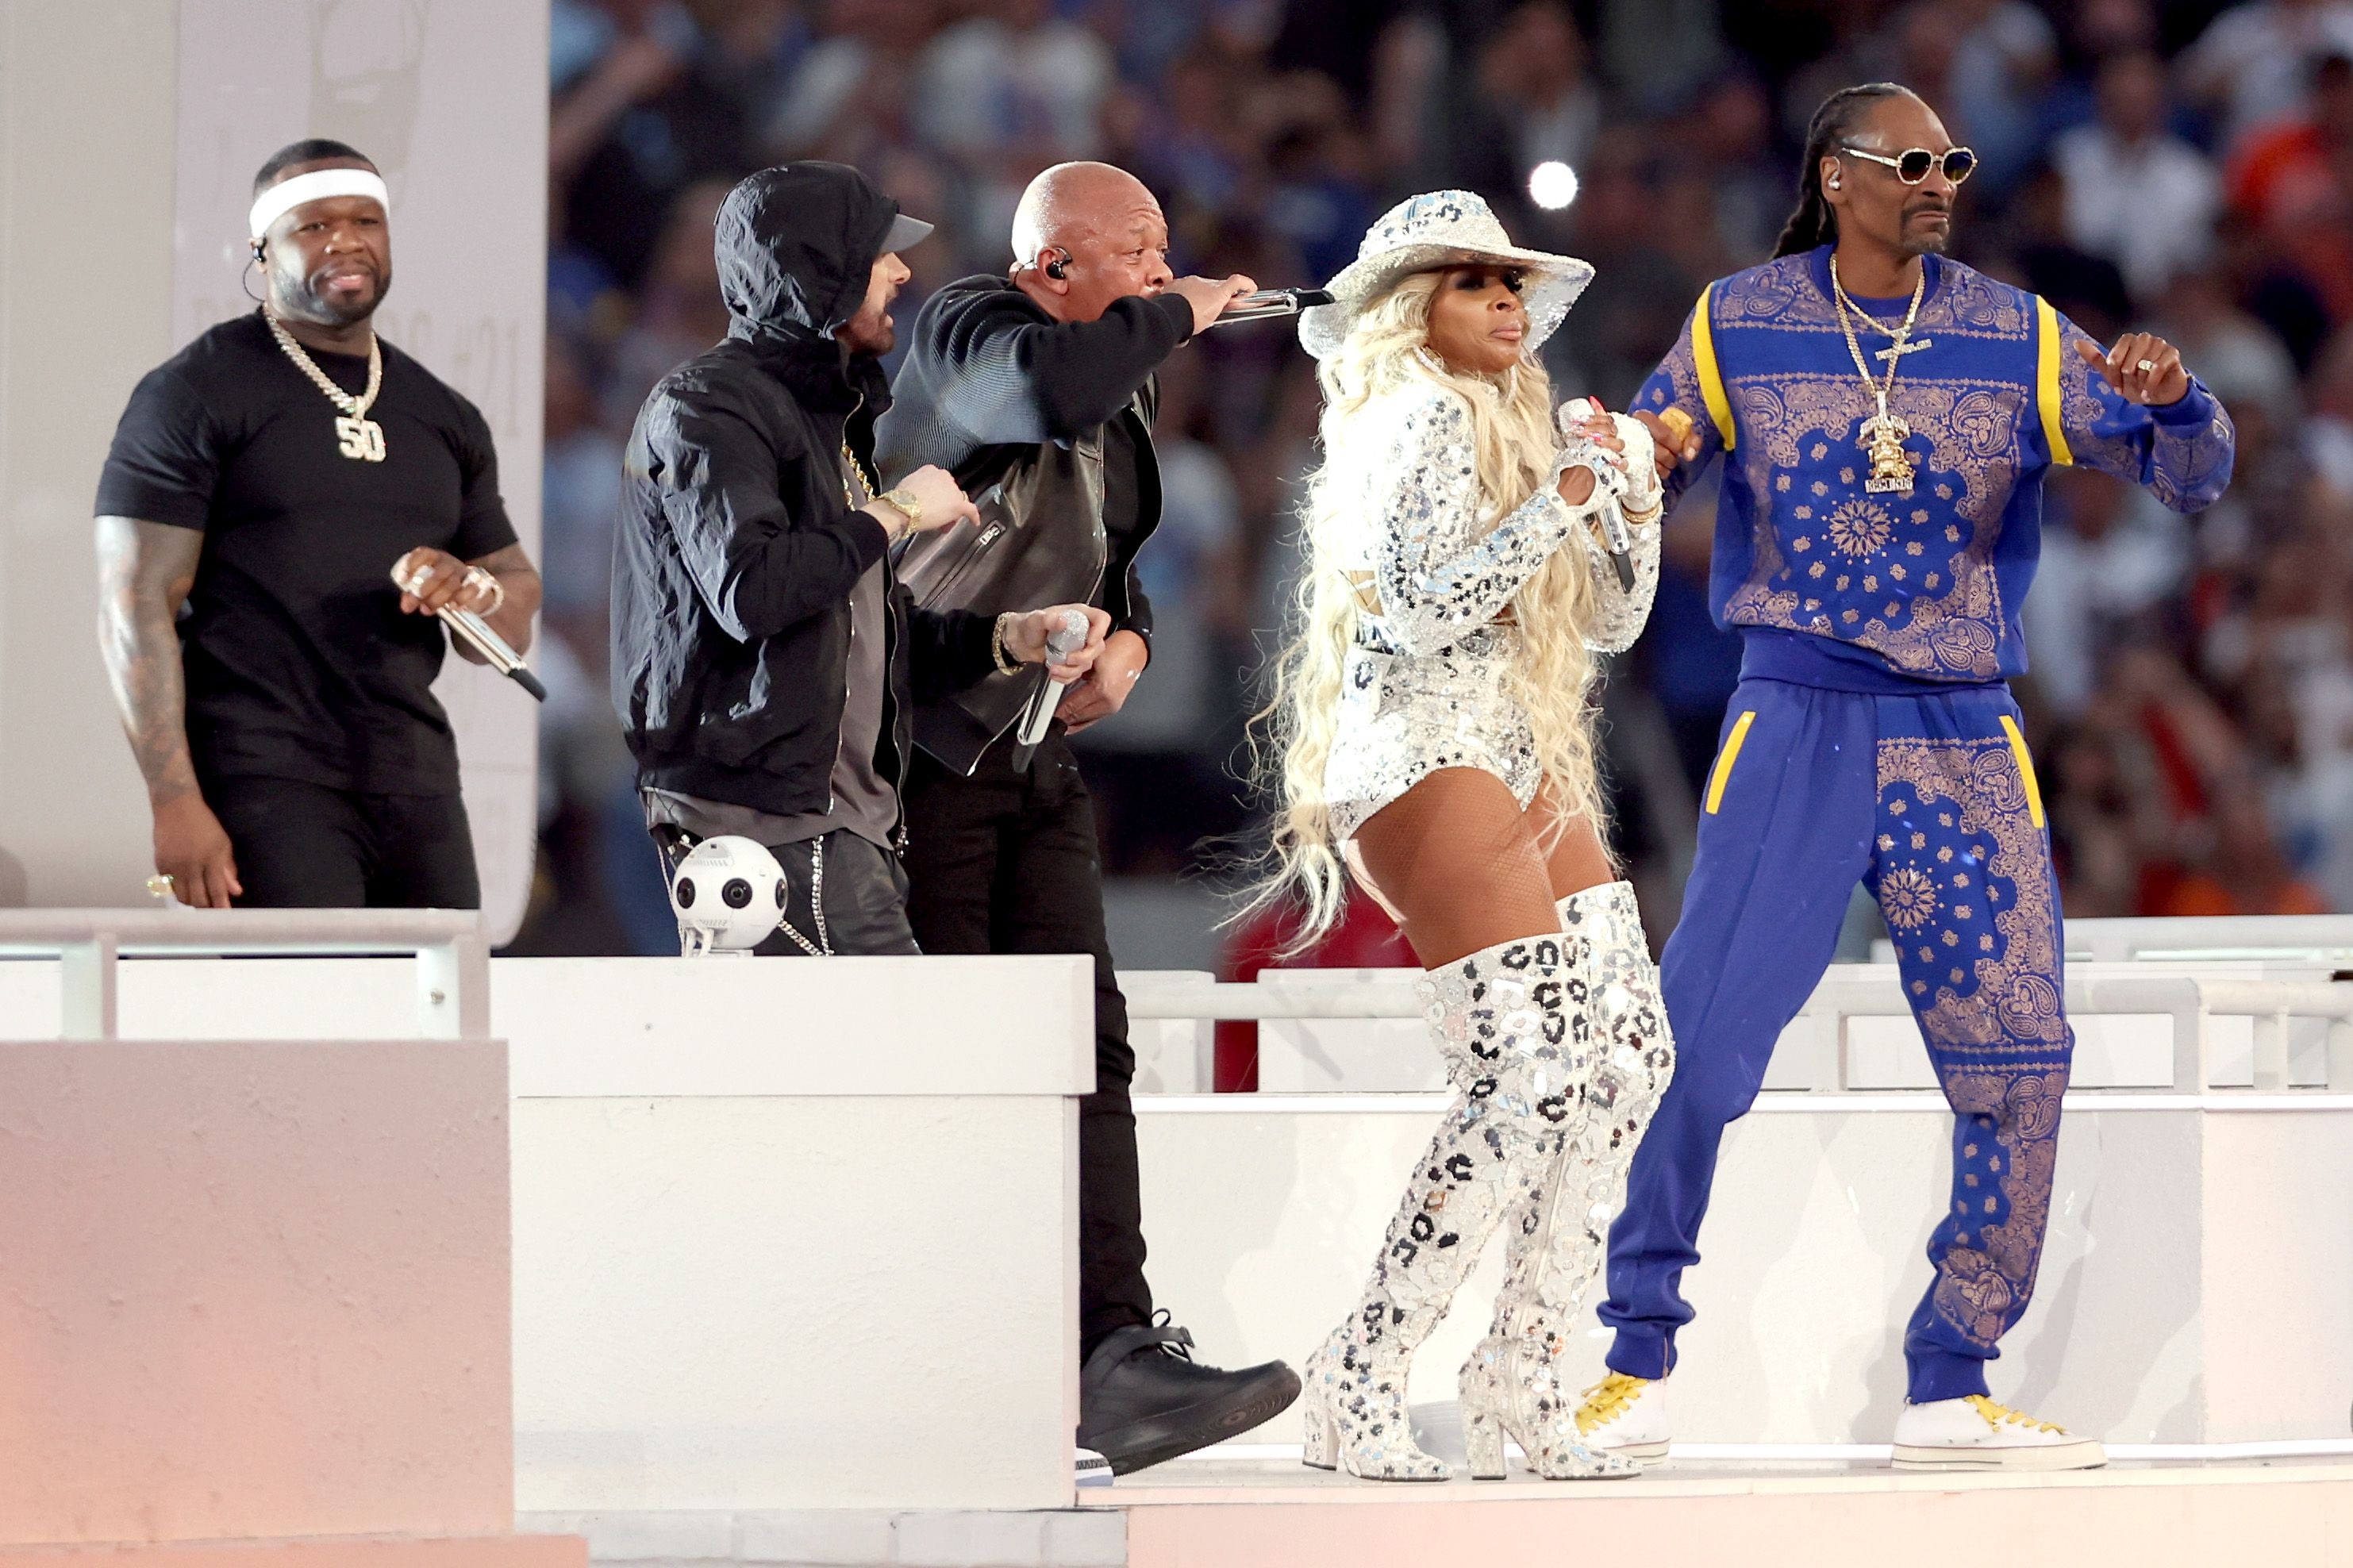 Super Bowl LVI Halftime Show: Headlined by Dr. Dre, Snoop Dogg, Eminem, Mary J. Blige, and Kendrick Lamar, and included guest appearances by 50 Cent and Anderson .Paak. 2970x1980 HD Wallpaper.